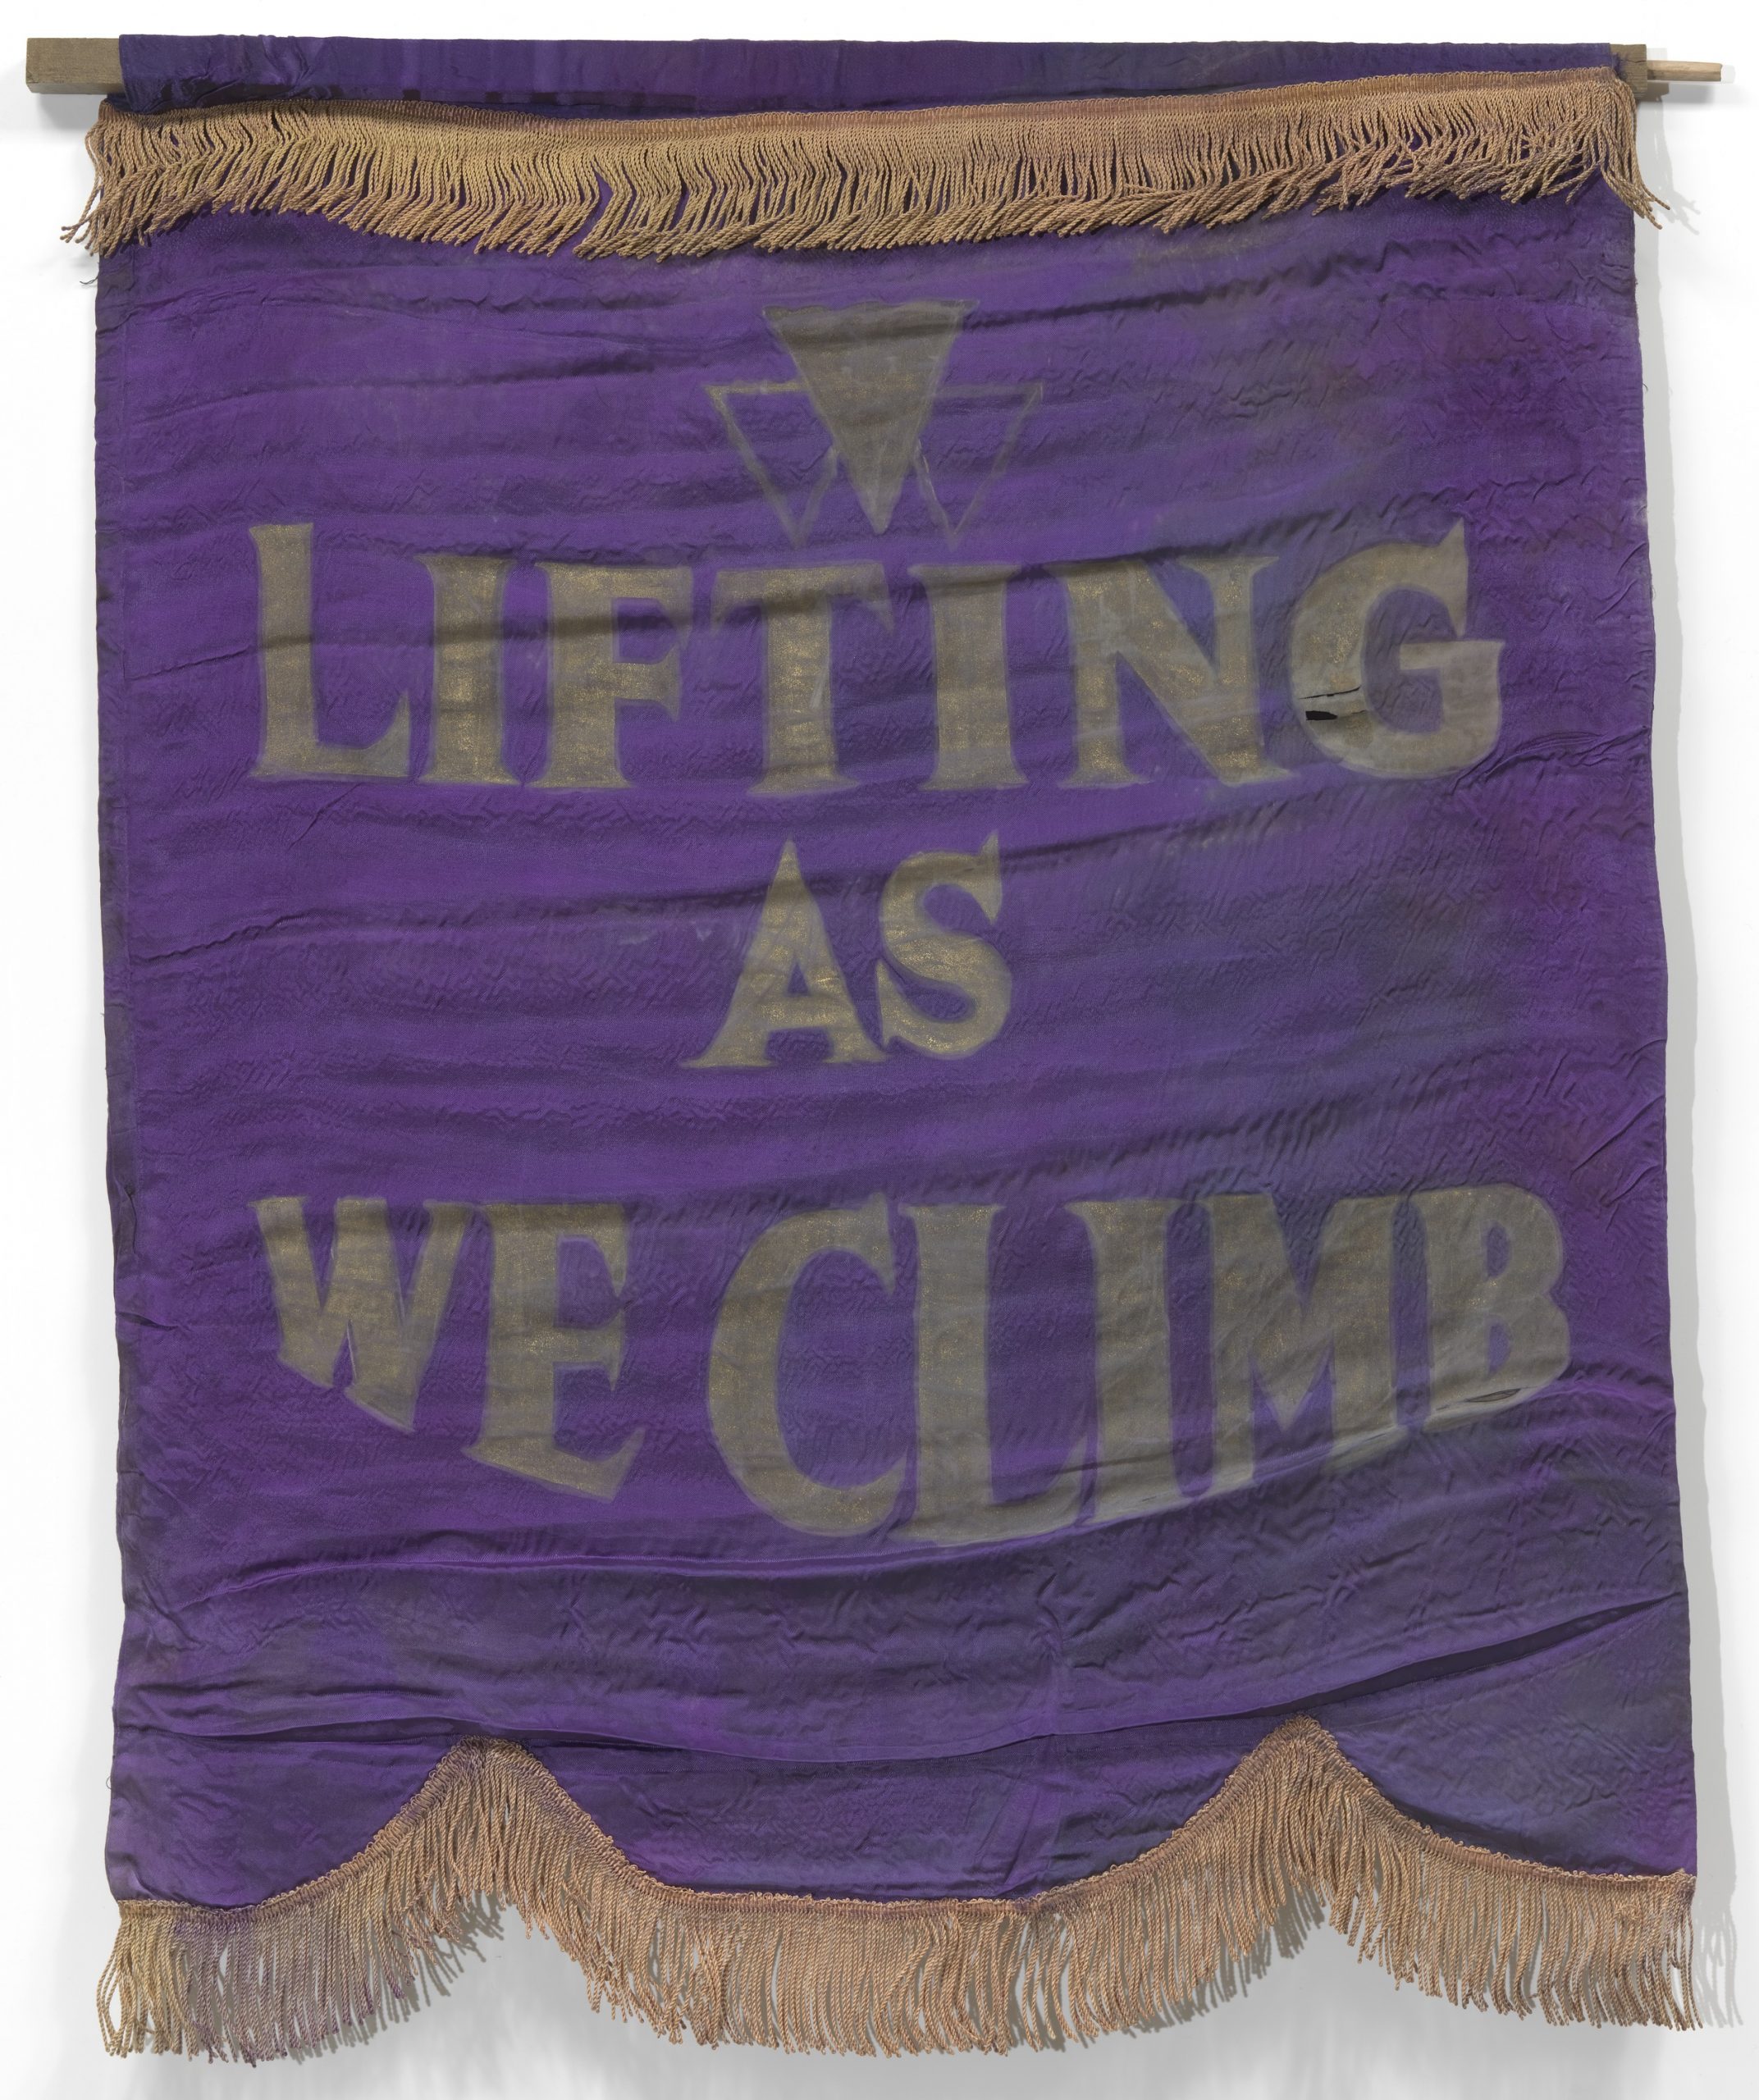 A purple cloth banner with gold fringing at the top and bottom that reads: Lifting As We Climb in gold lettering.